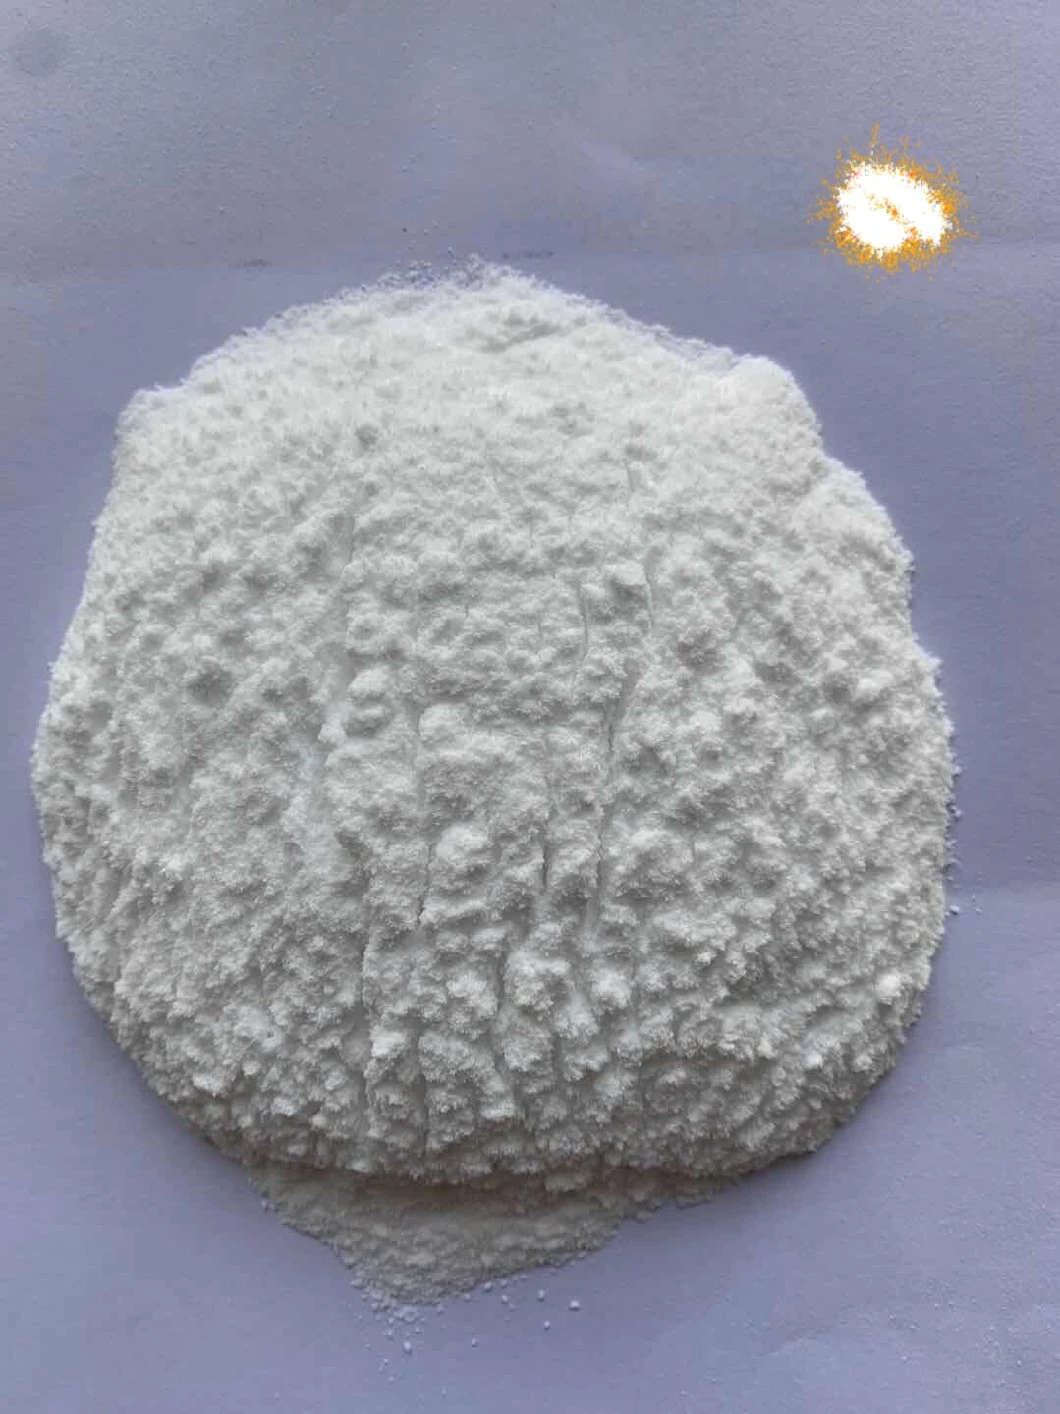 Tech Grade Dl-Tartaric Acid 99.5% (CAS: 133-37-9) From Factory with Competitive Price